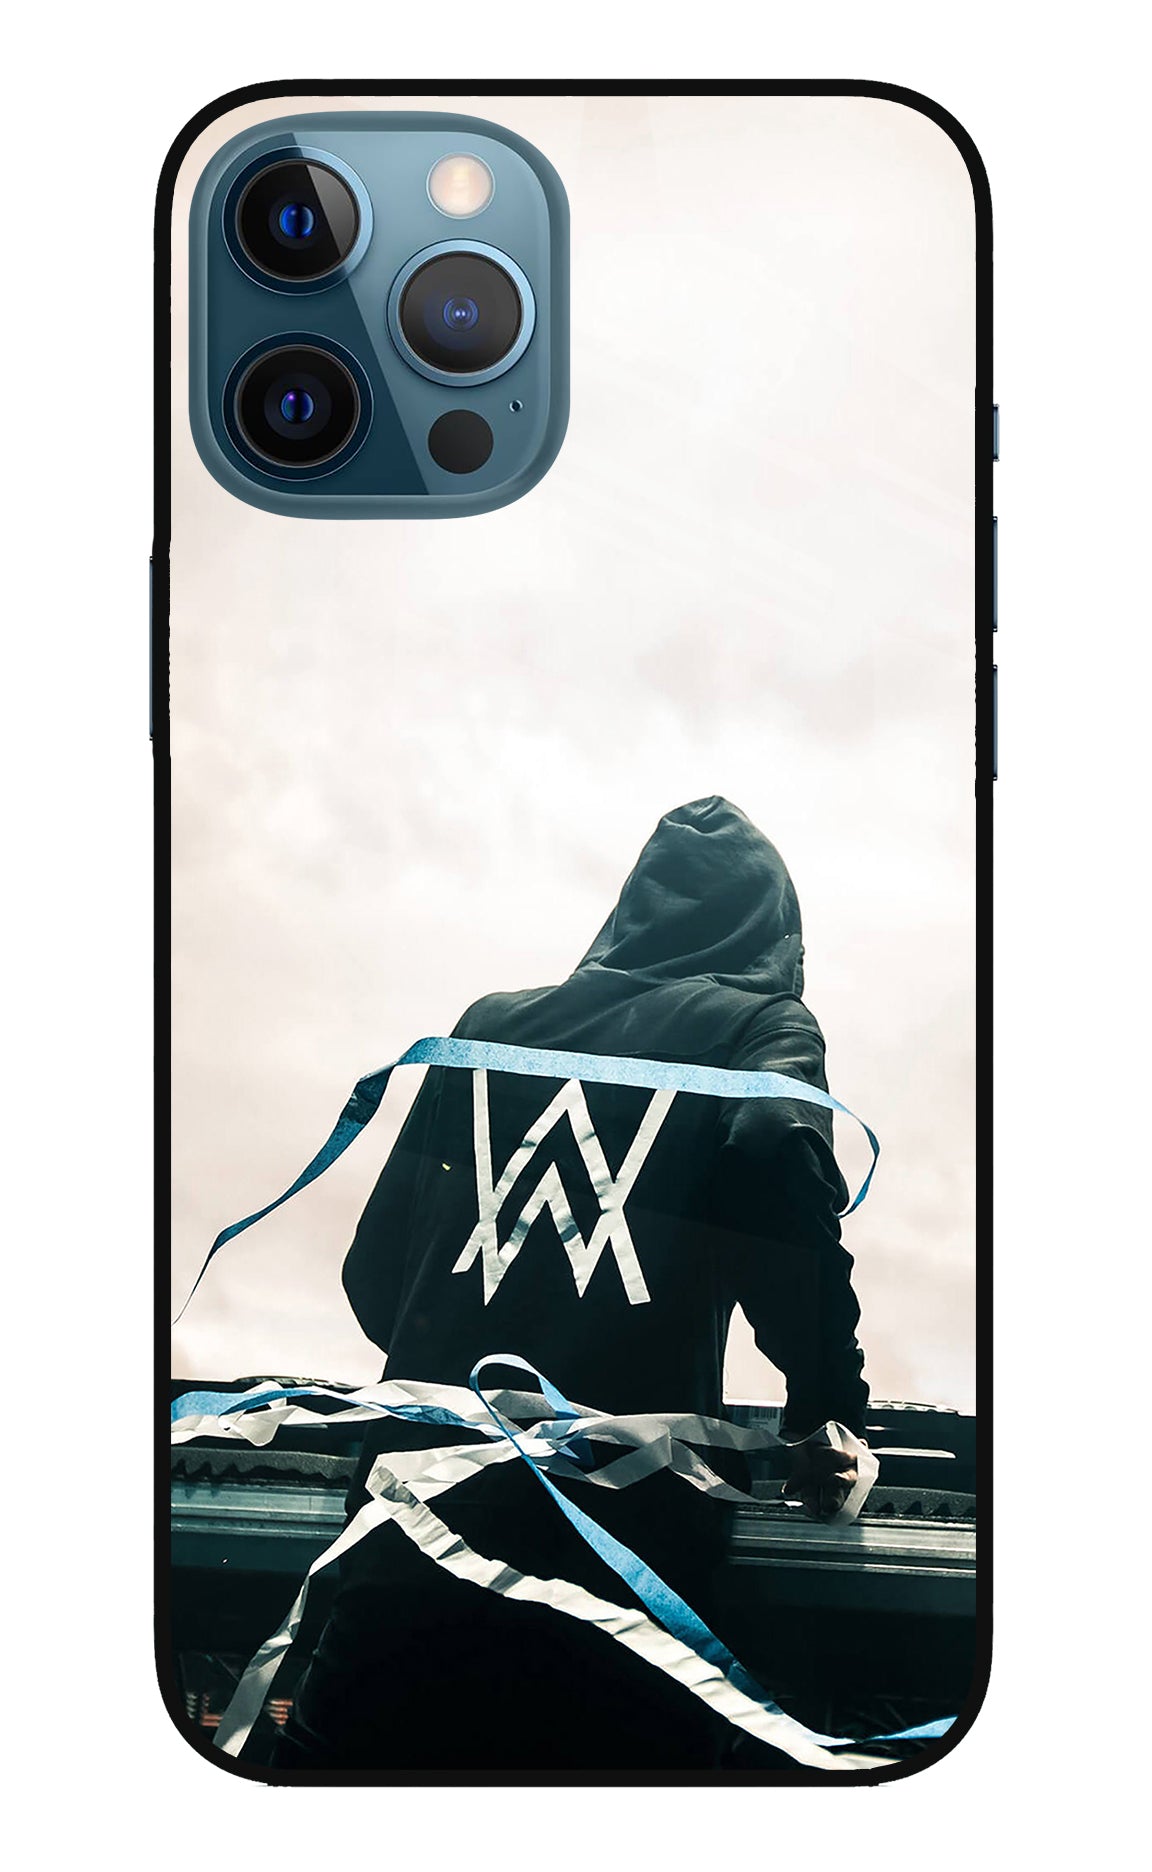 Alan Walker iPhone 12 Pro Max Back Cover